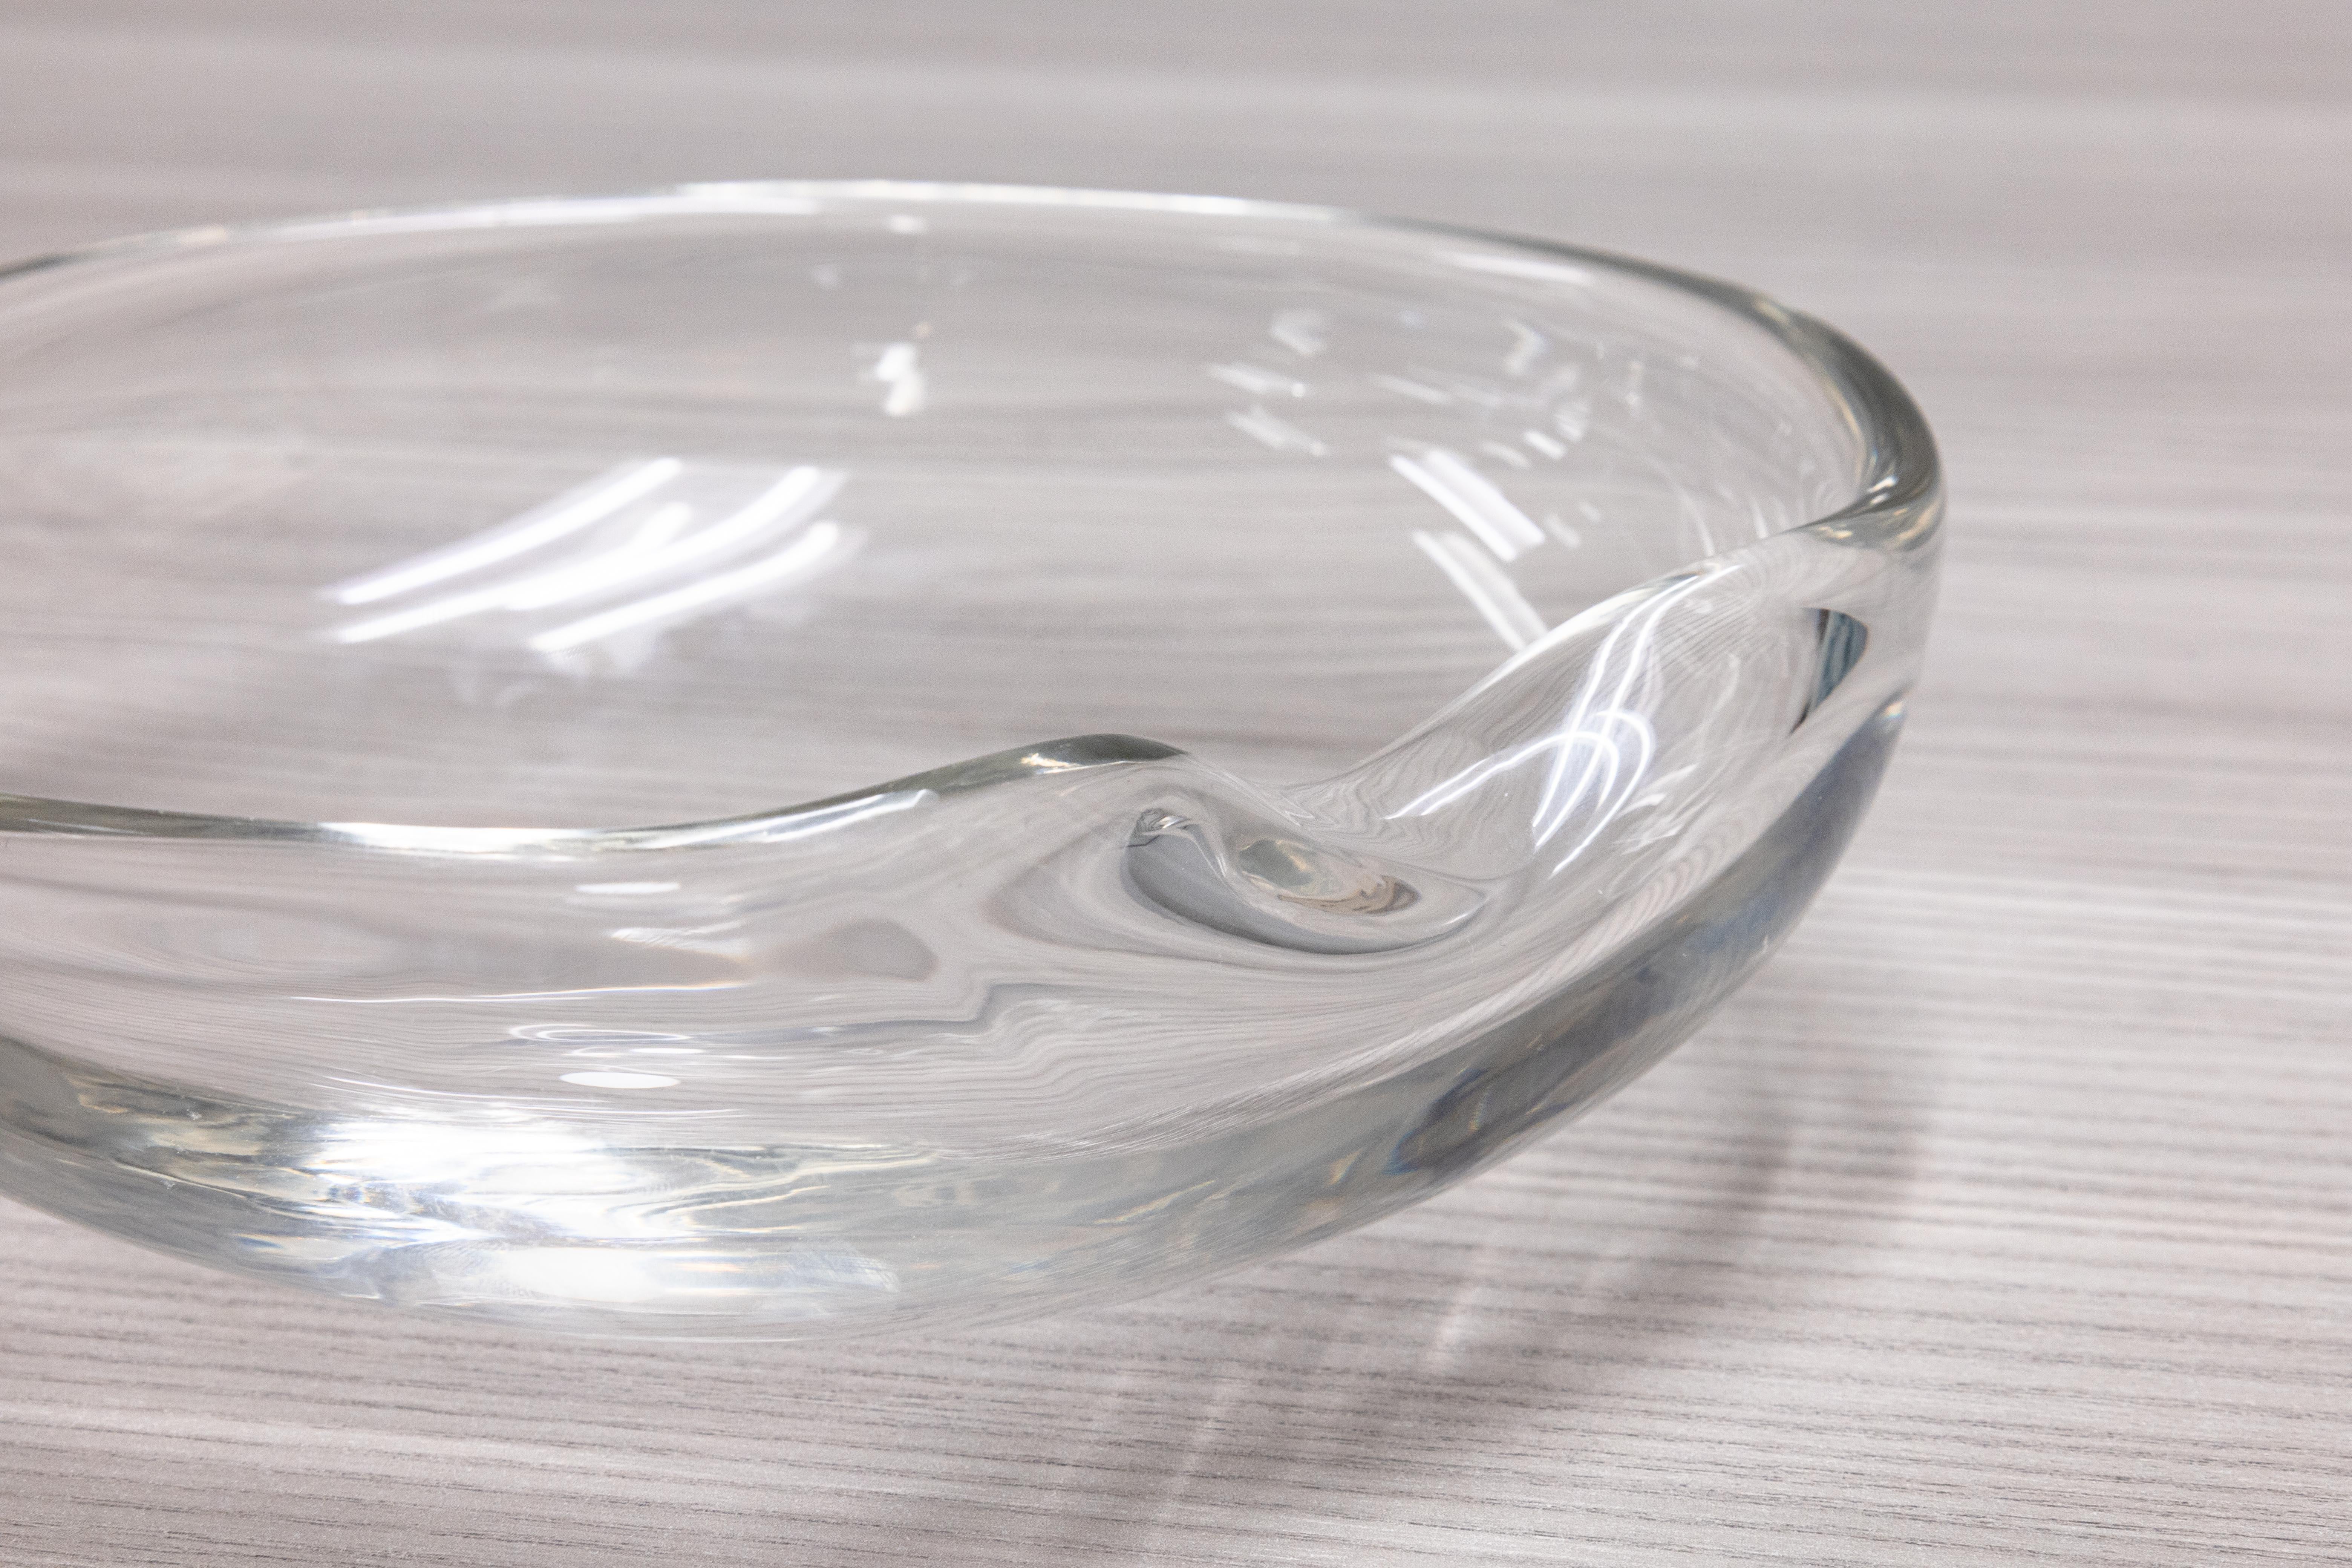 A gorgeous hand blown glass bowl designed by Elsa Peretti for Tiffany & Co. This piece, known as the “Thumbprint Bowl”, features a lovely classic design with a sloped side that fits nicely into your thumb. This piece is signed on the bottom, and